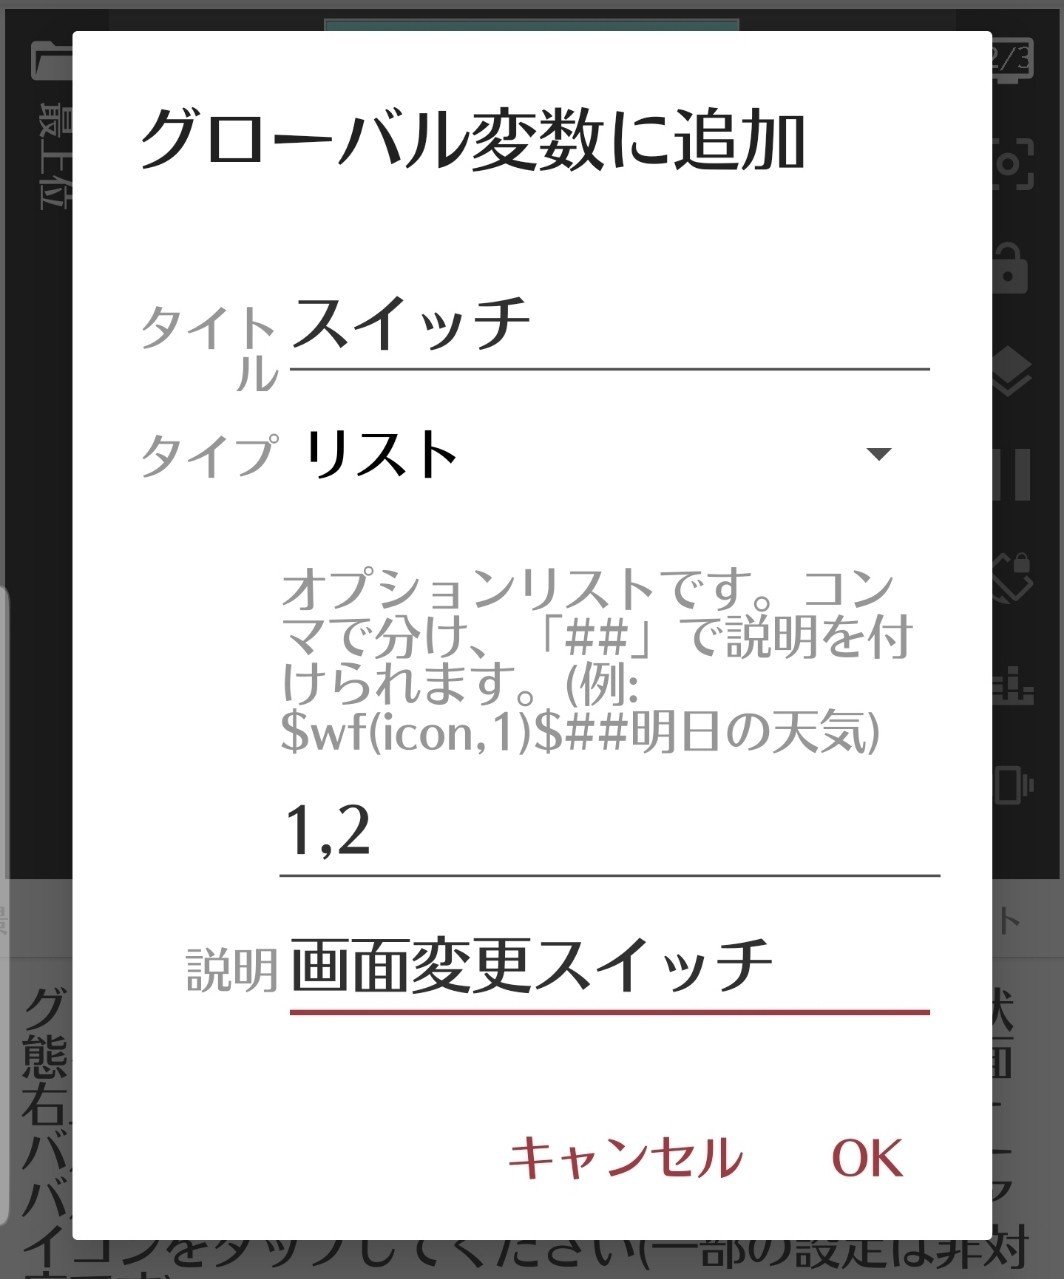 Klwpで画面変更2種類 Tokino Note